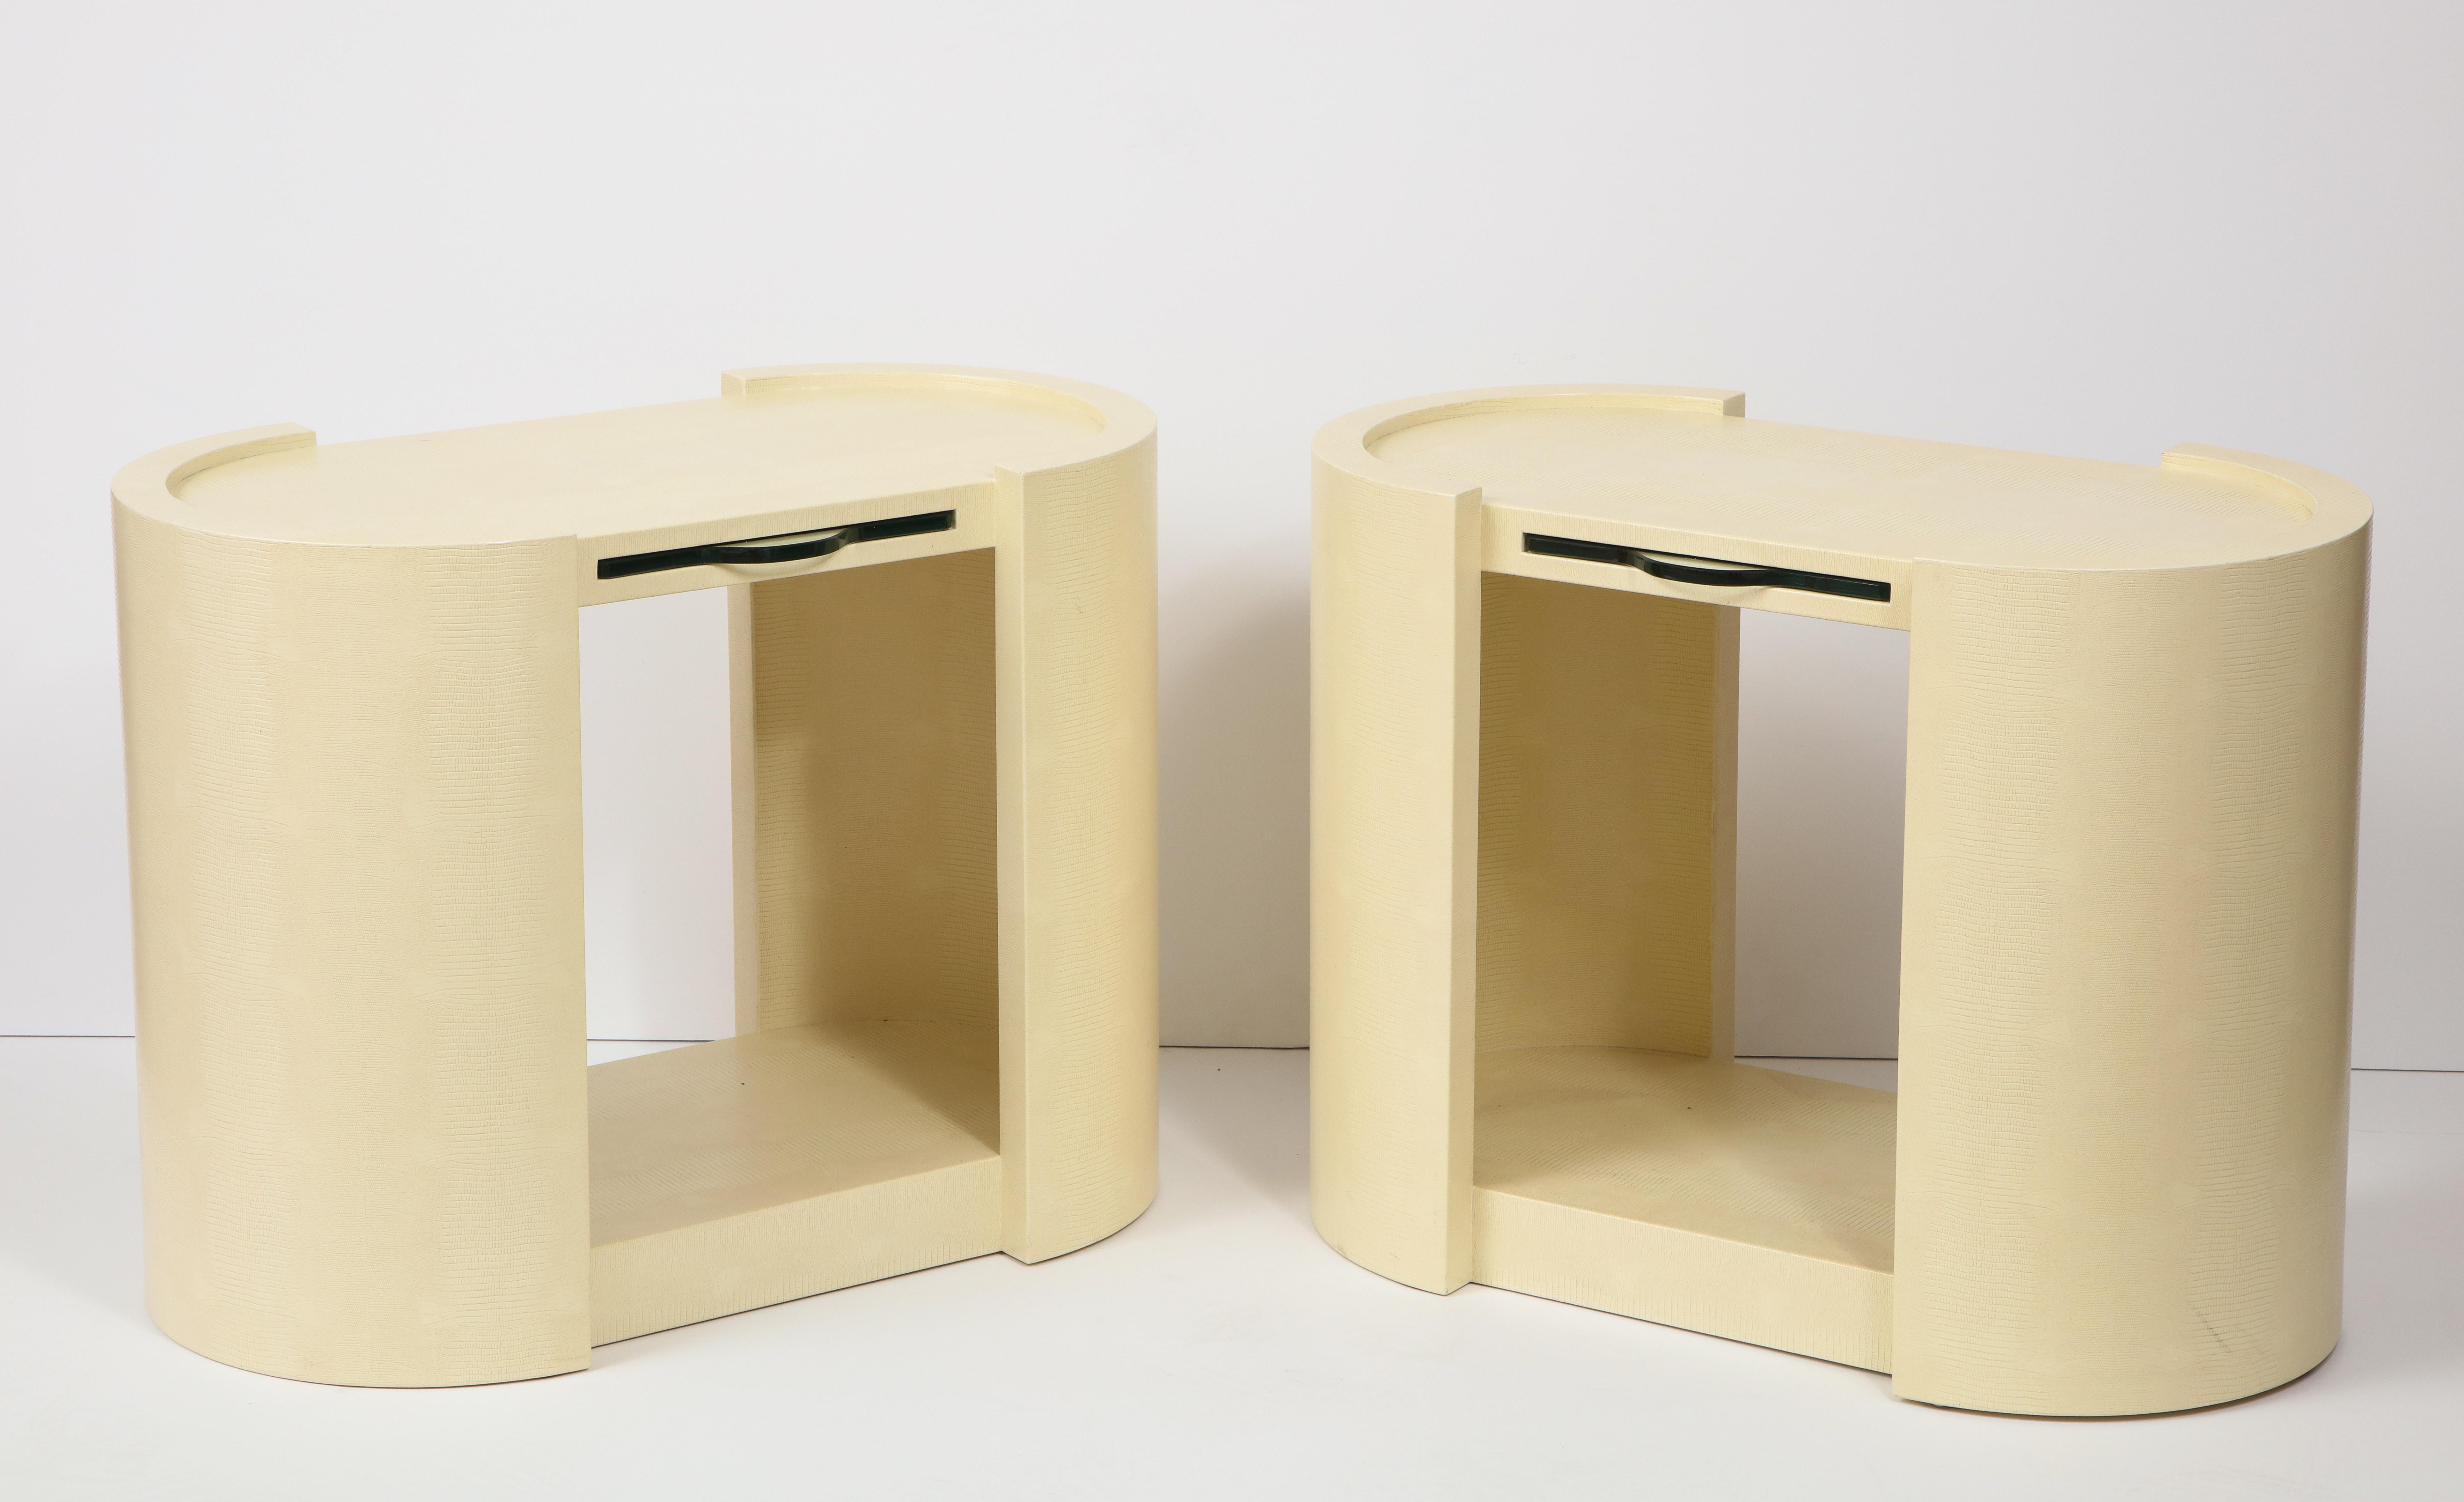 Pair of cream colored embossed leather side tables / nightstands by Karl Springer, 1982.
The oval tables have glass pullout / pull-out trays and on the bottom there are adjustable feet and
the Karl Springer label.
 